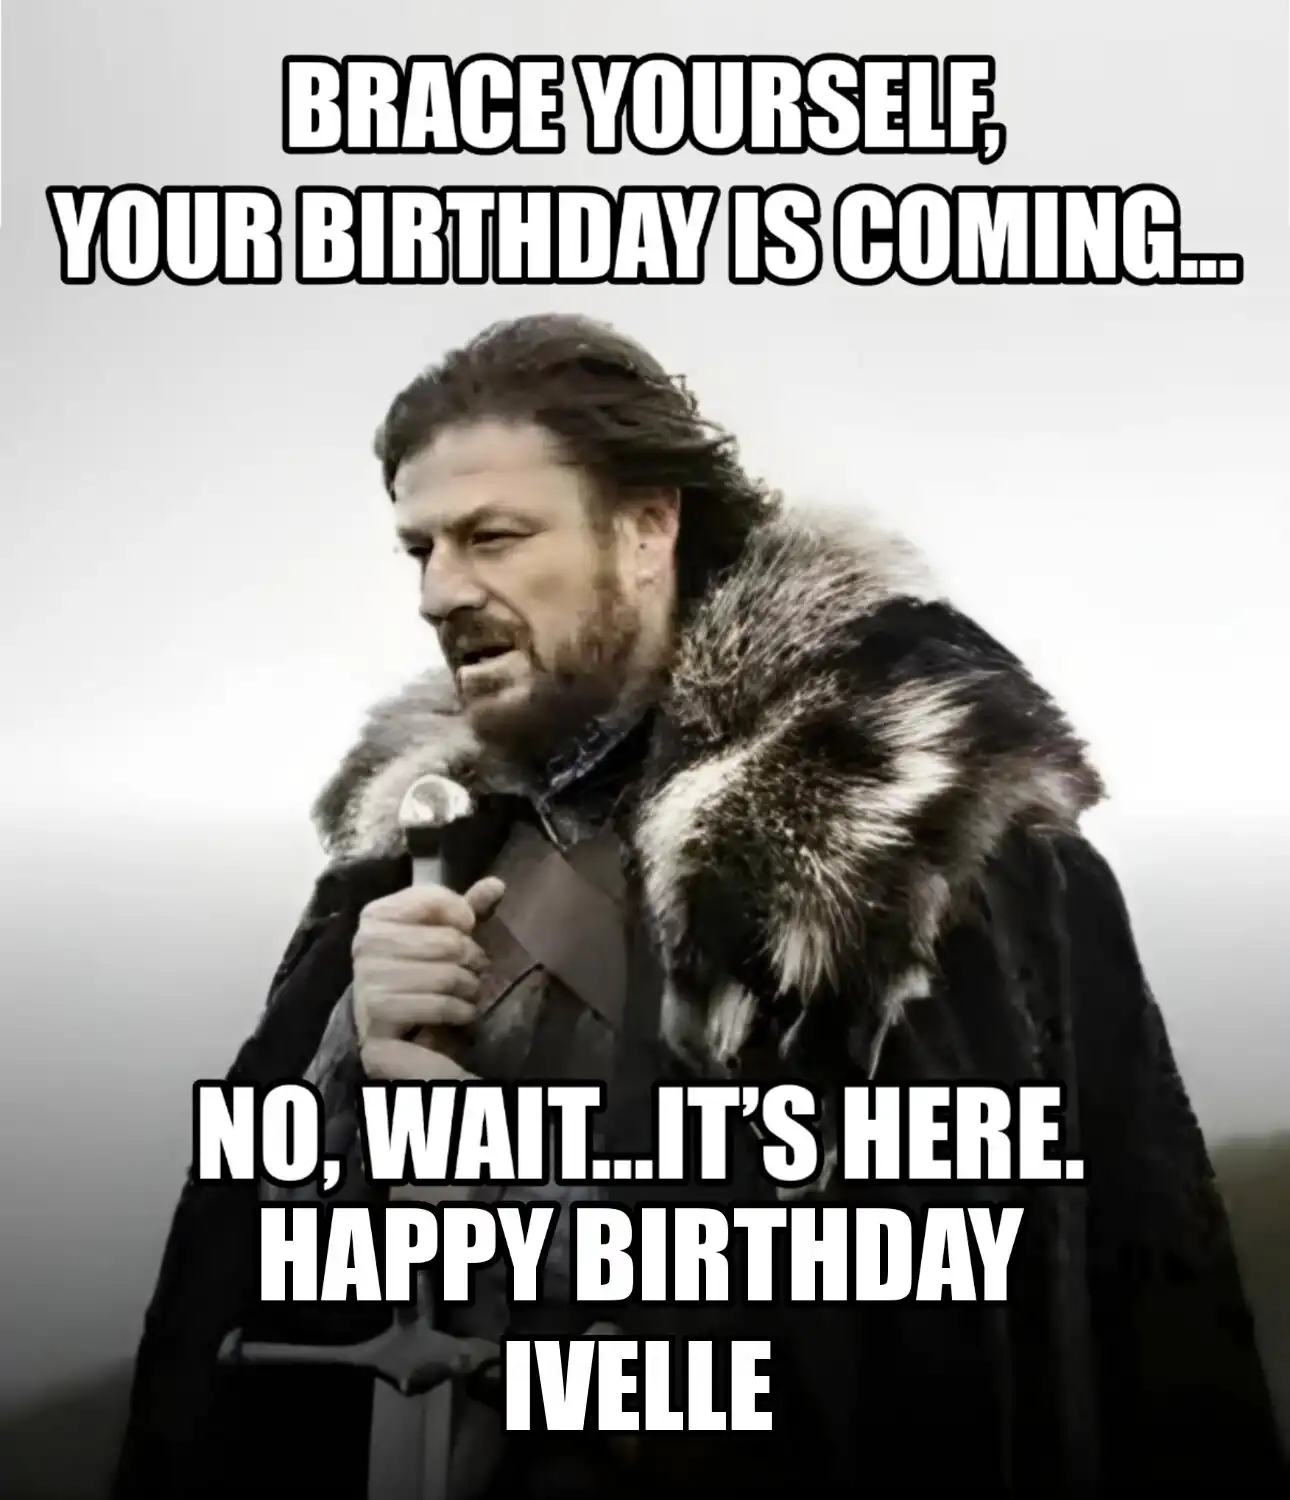 Happy Birthday Ivelle Brace Yourself Your Birthday Is Coming Meme